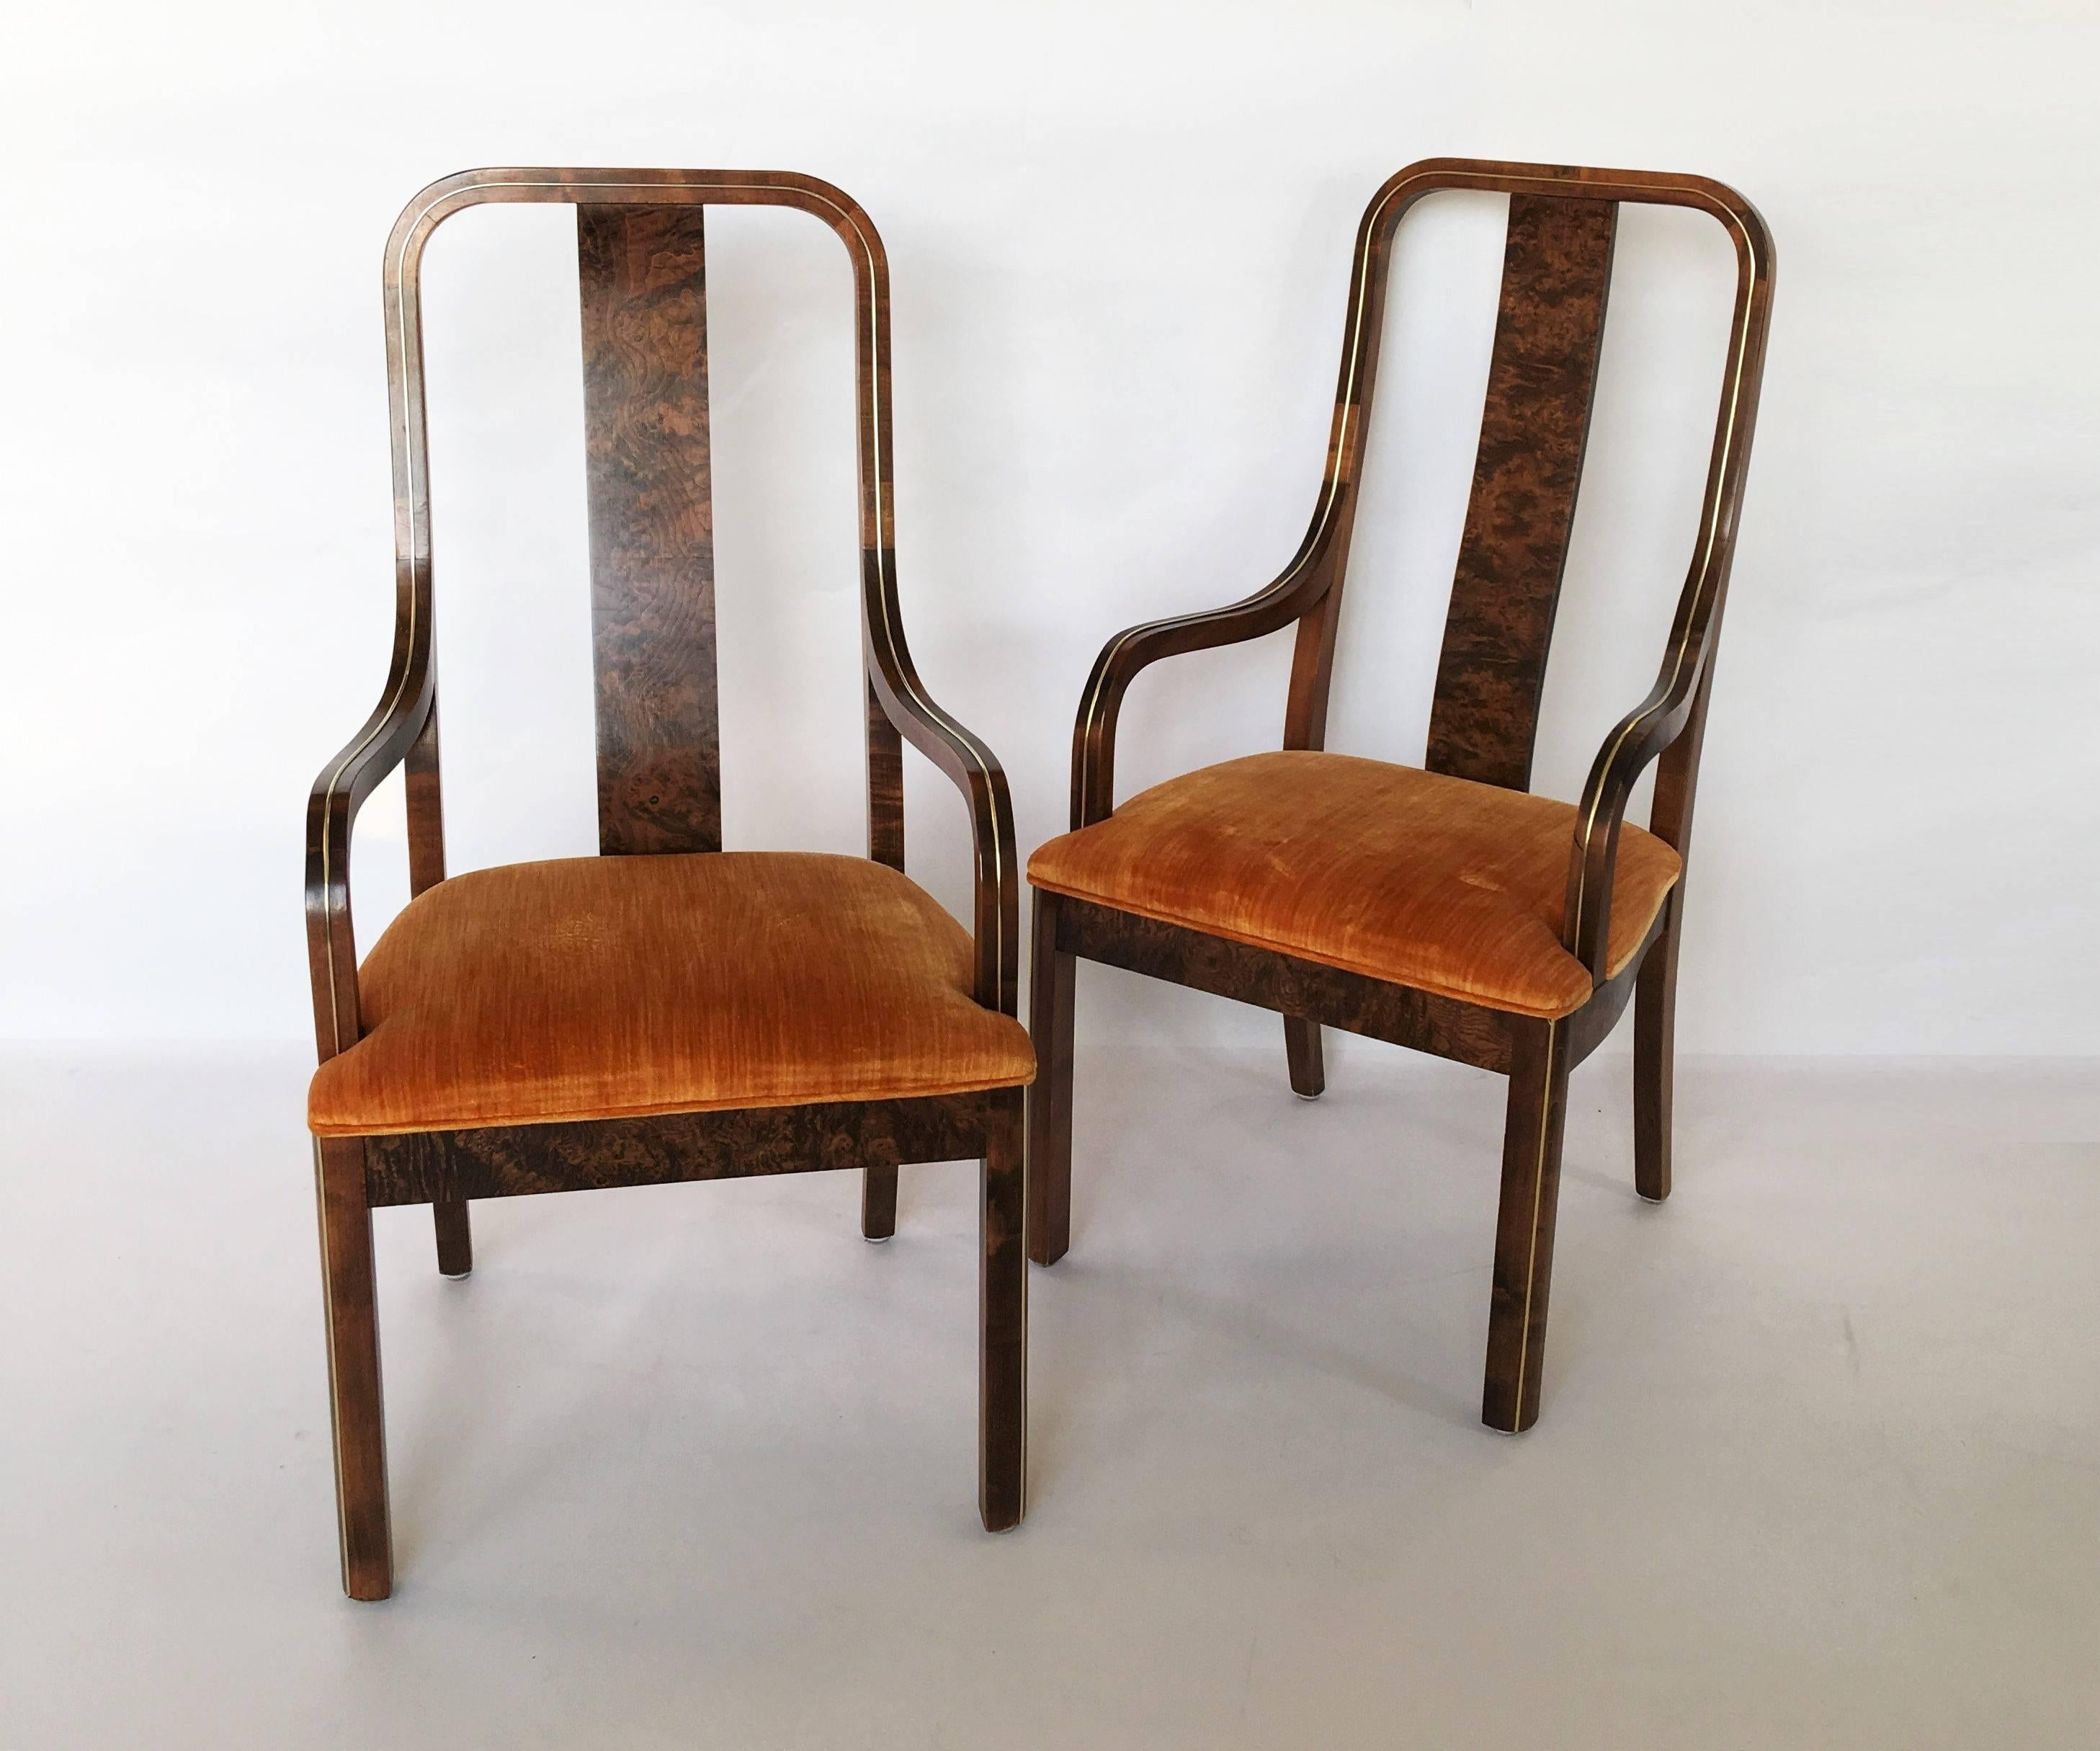 Set of six dining chairs by Century Furniture Company. The chairs feature stunning burled wood, with exquisite brass inlay and original orange velvet upholstery. Comes with two-arm chairs, four-arm less chairs. Retains original tags. 

Also